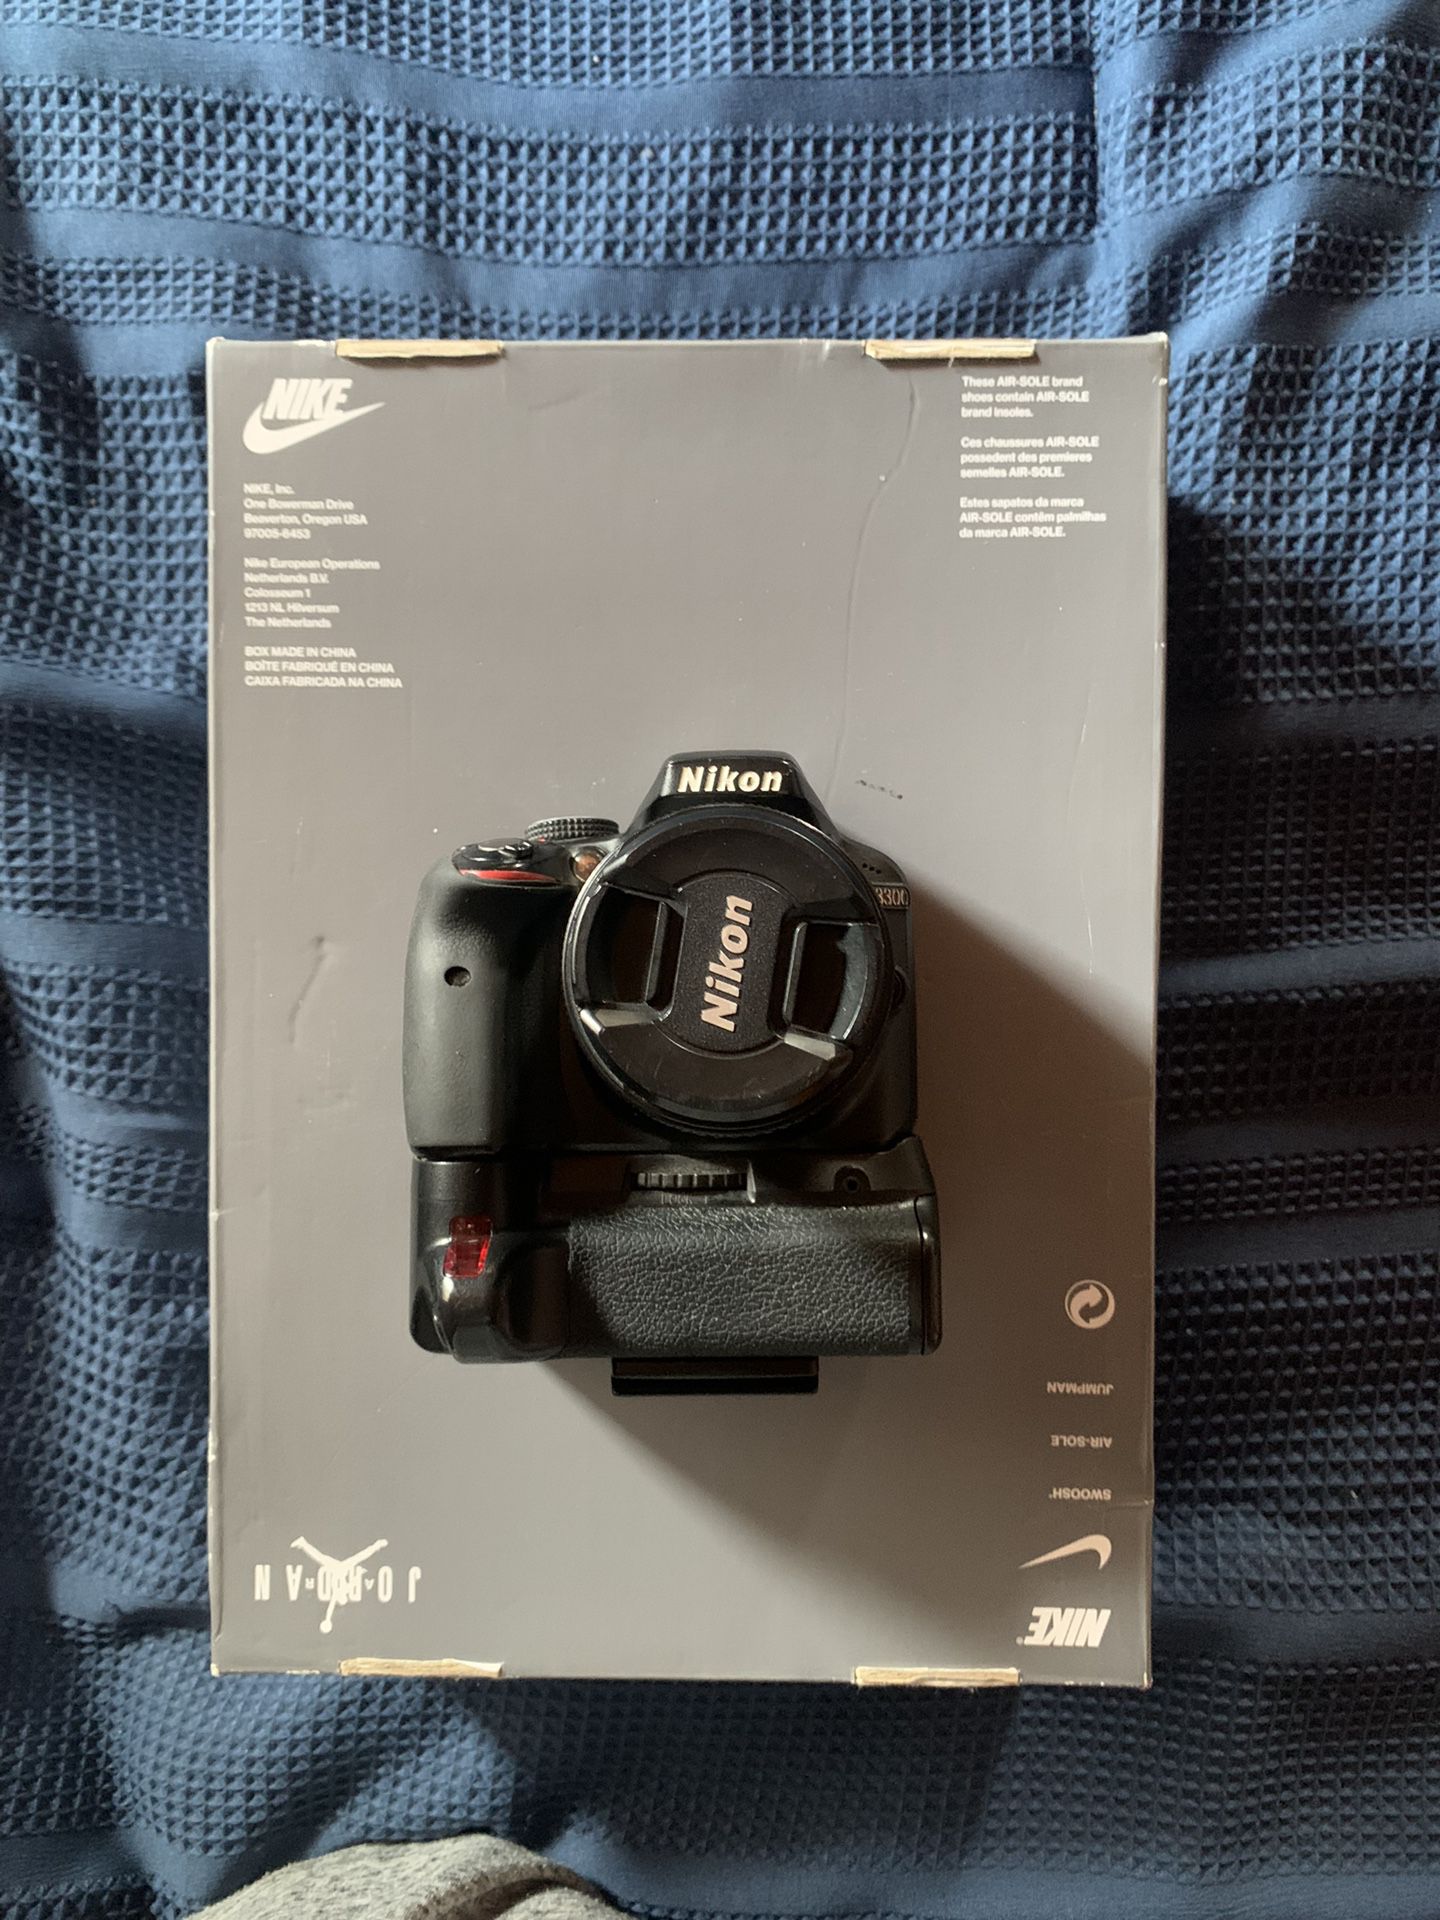 Nikon D3300 With DX Lense / Sigma Lense / Wireless Clip On Microphones